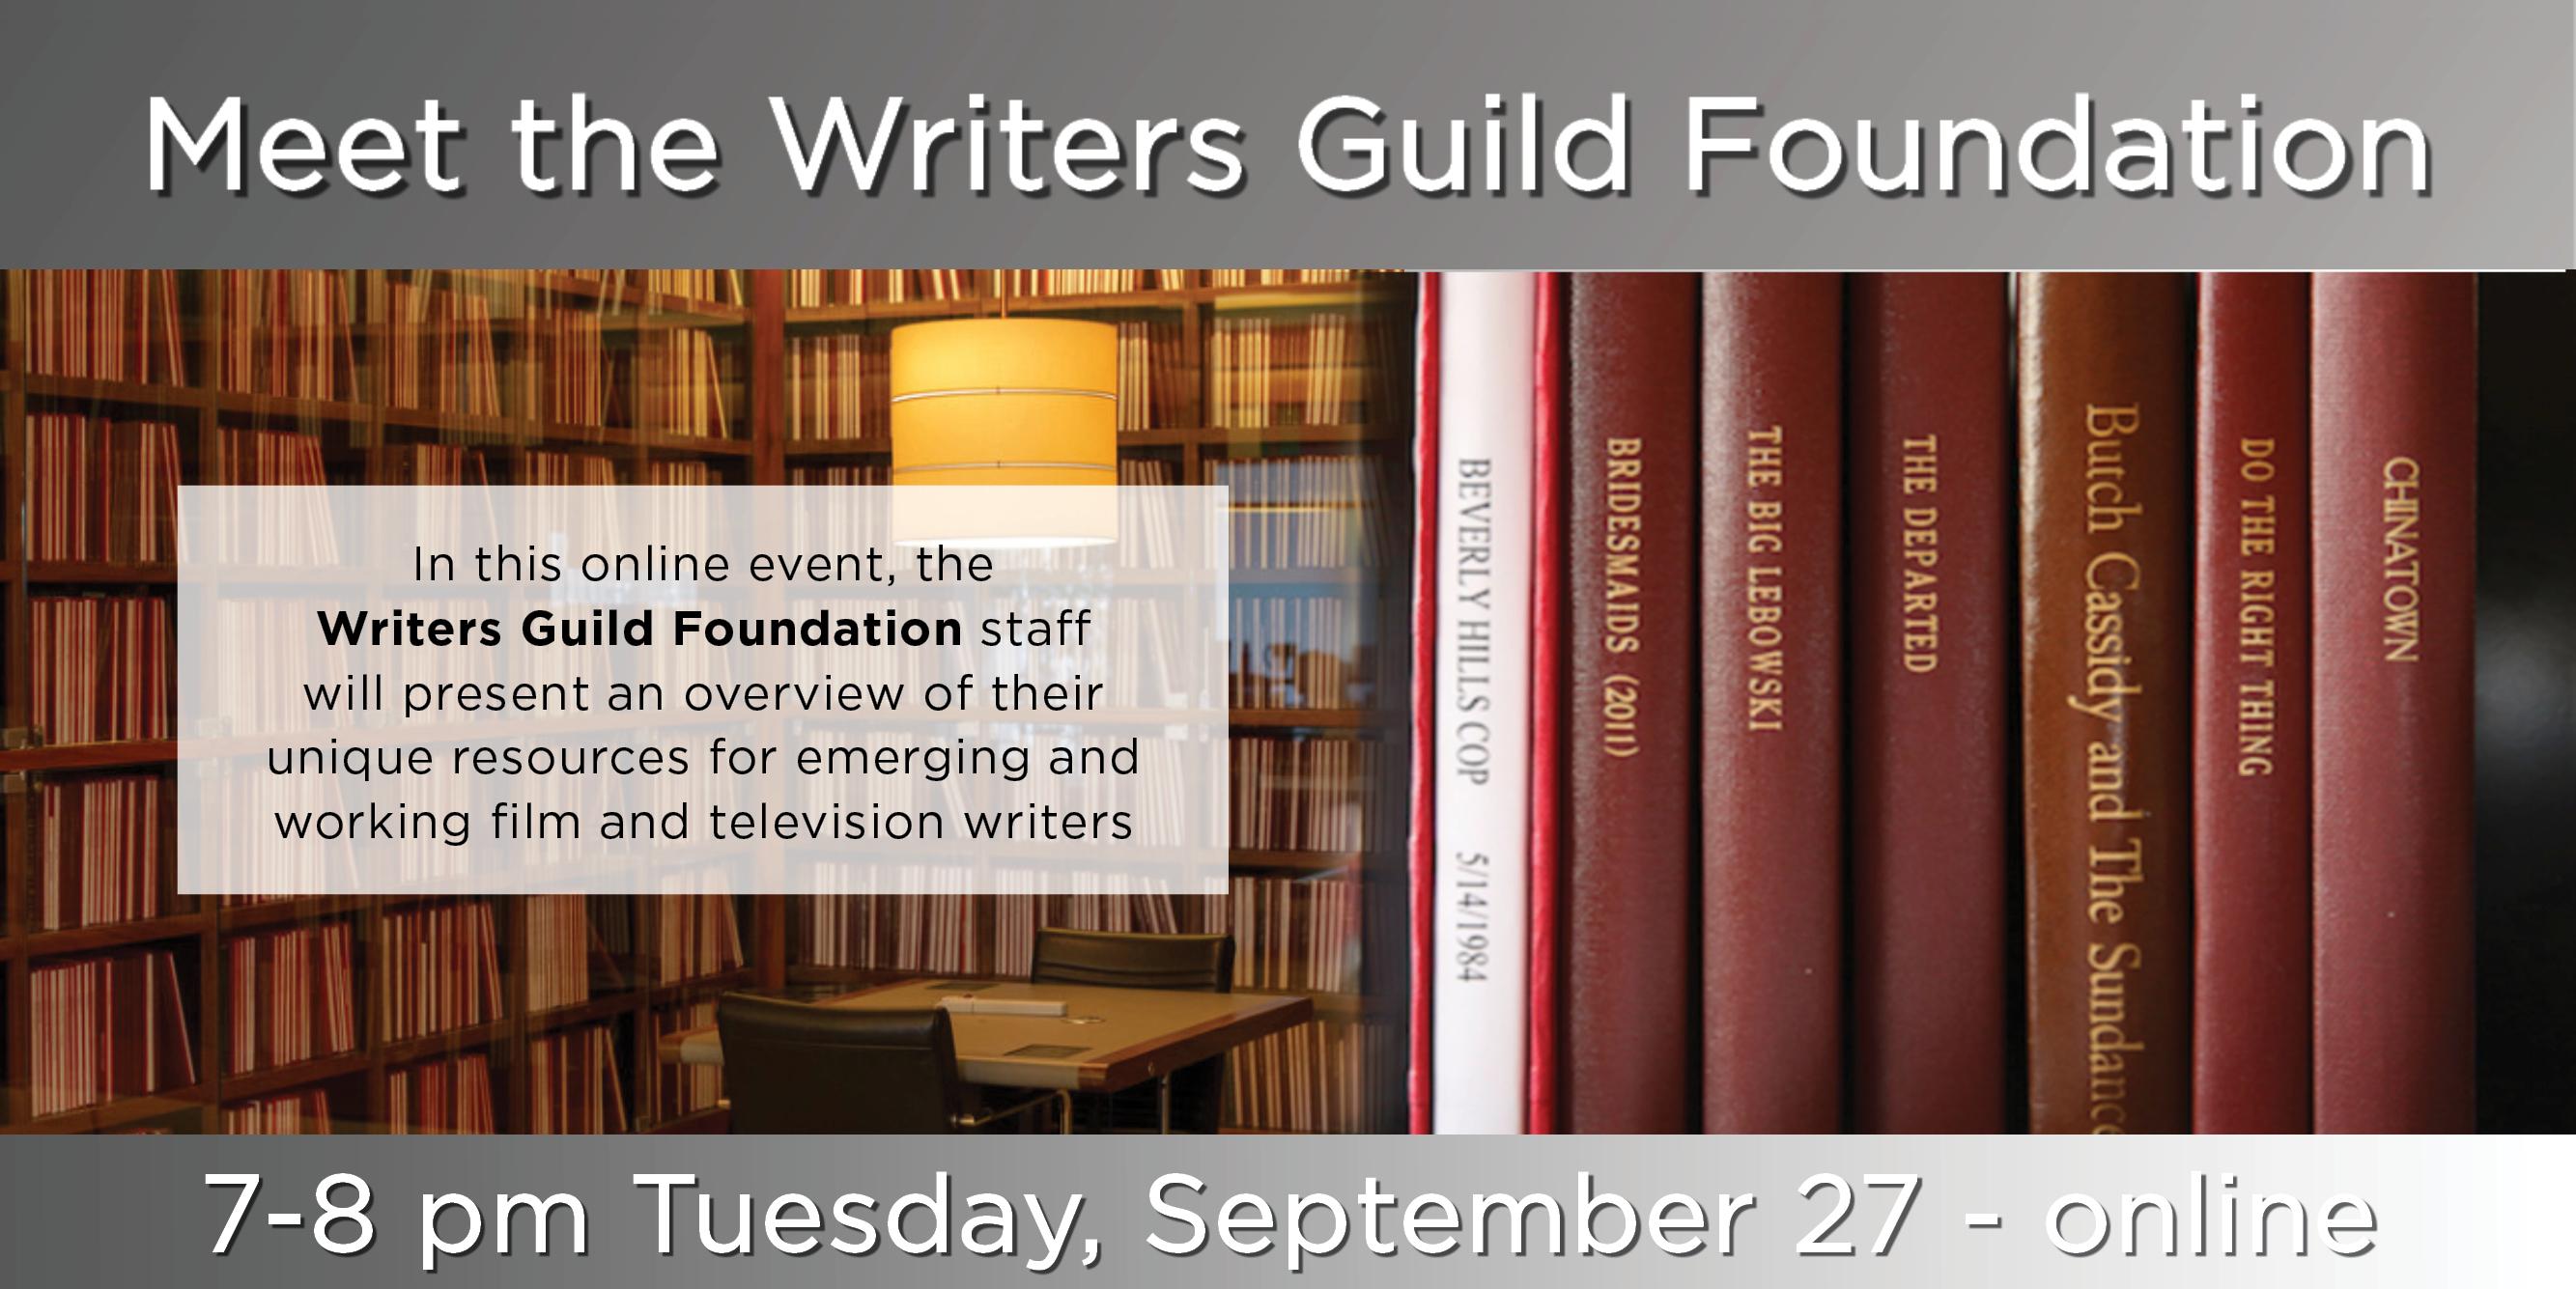 Library: Meet the Writers Guild Foundation - online